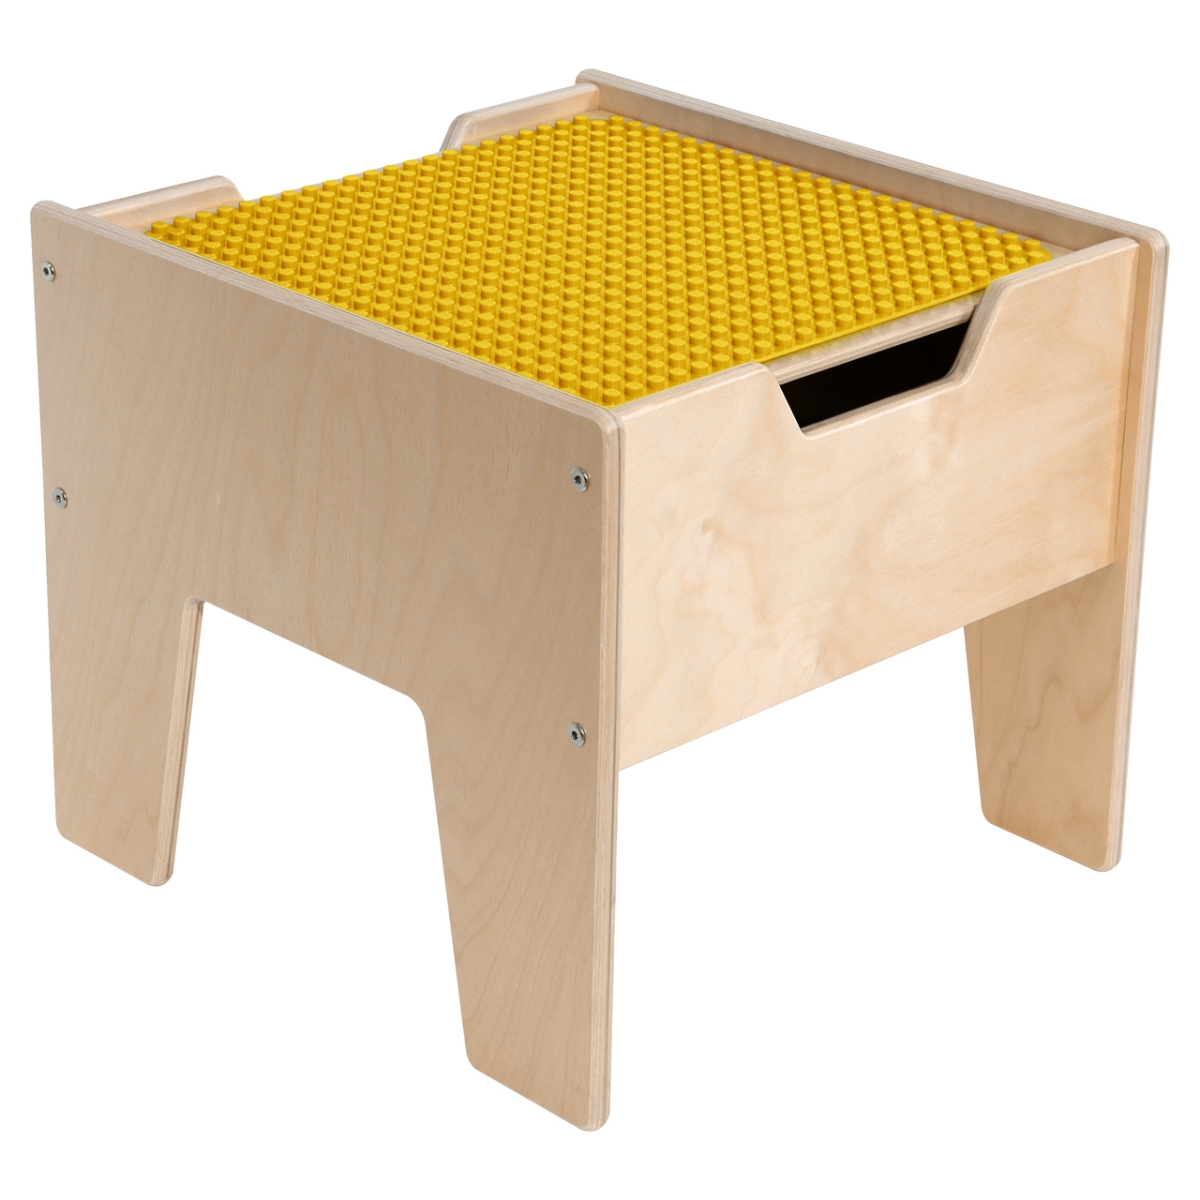 Picture of Contender C991300-PY 2-N-1 Activity Table with Yellow DUPLO Compatible Top - RTA